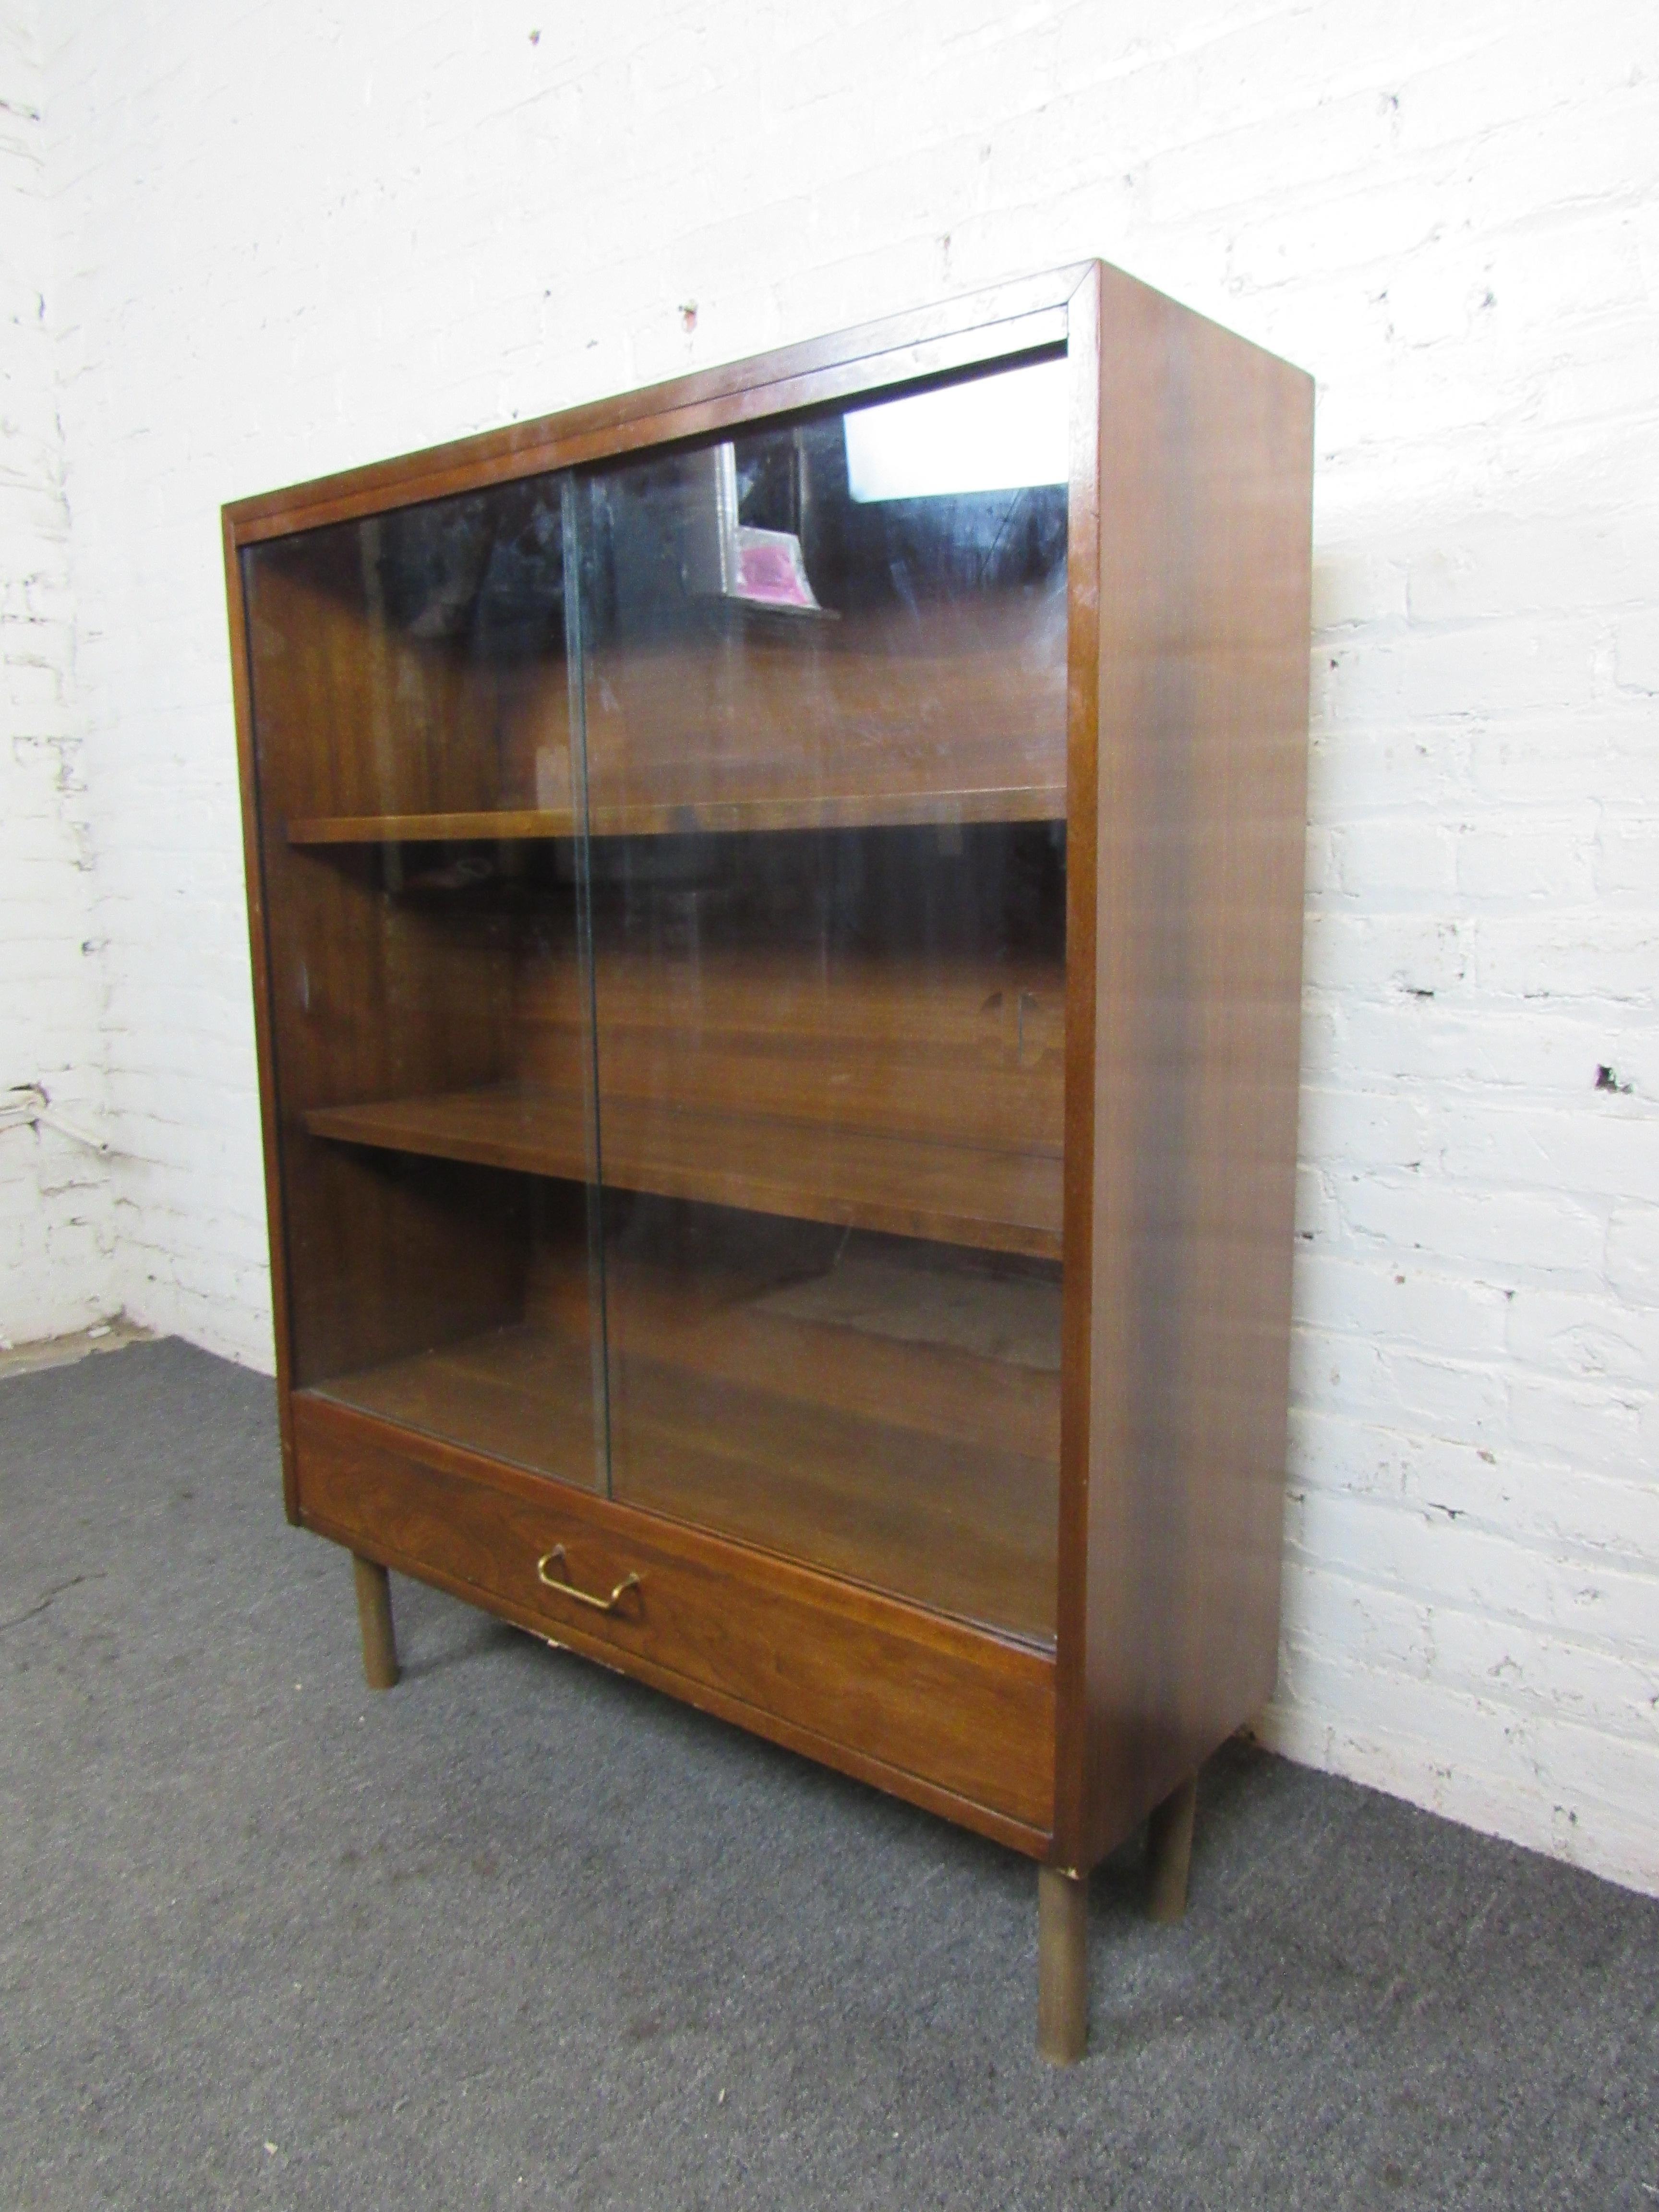 This large cabinet by Martinsville can be used as a display case or for storage with its large amount of shelf space and sliding glass doors. Handsome walnut woodgrain elevates this cabinet's design, and a large bottom drawer allows for further